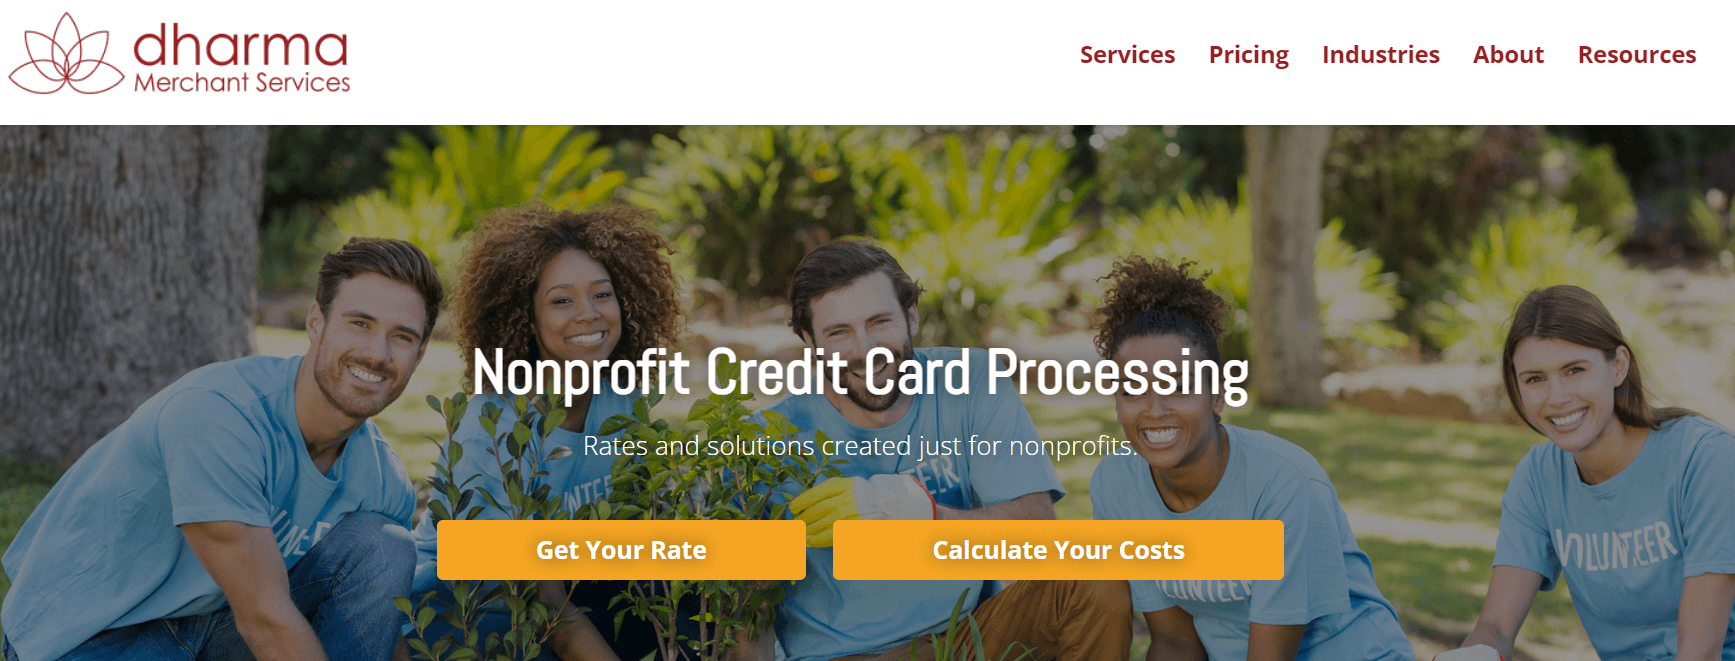 Screenshot of the Dharma Merchant Services homepage, a nonprofit credit card processing option